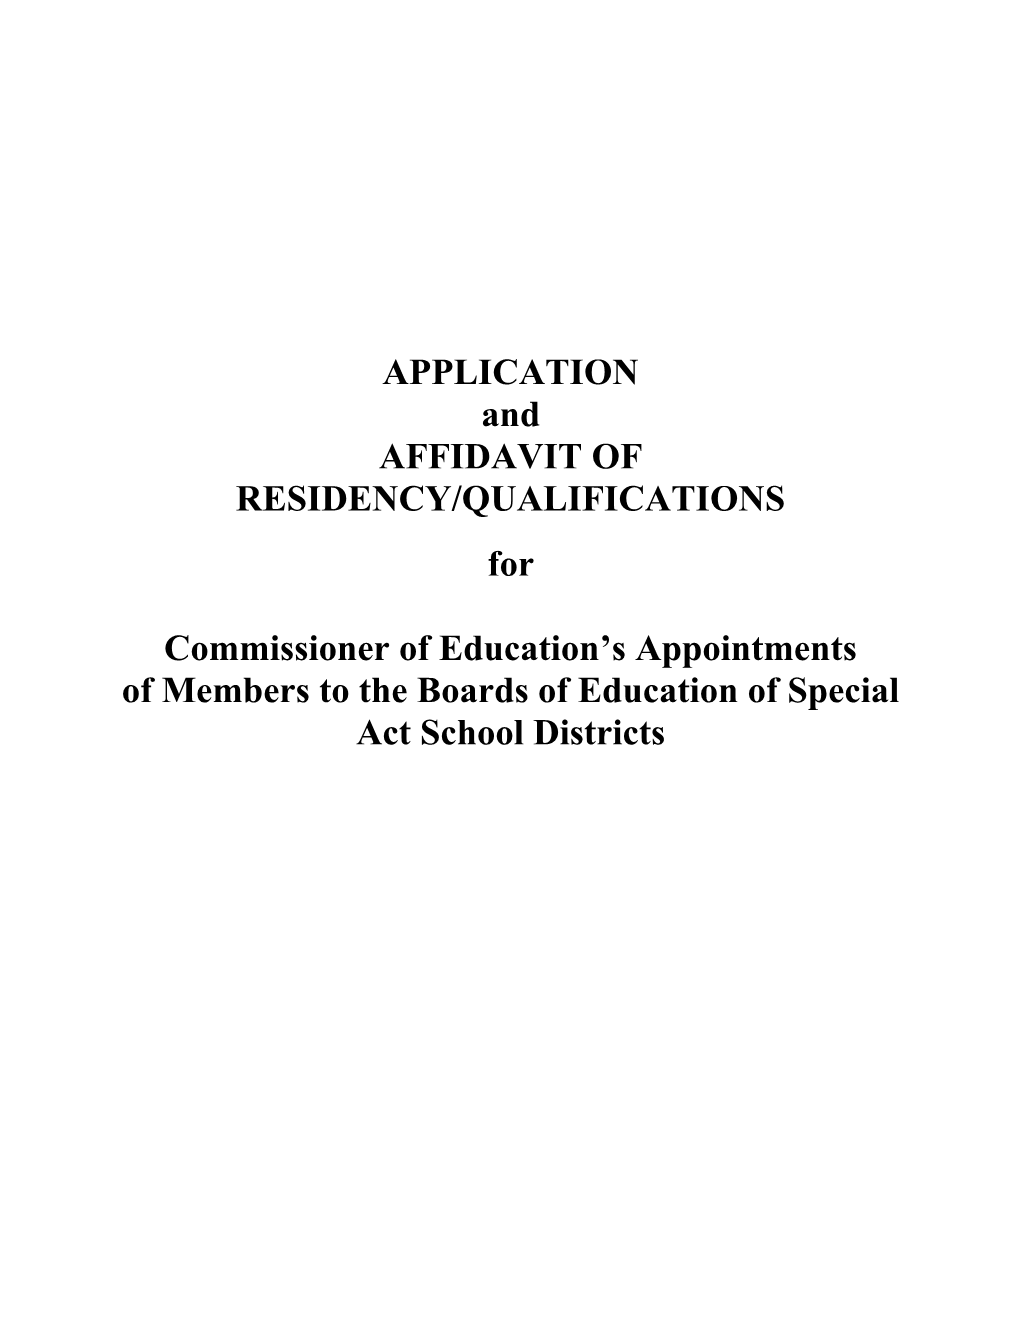 Application and Affidavit of Residency/Qualifications for the Commissioner of Education's